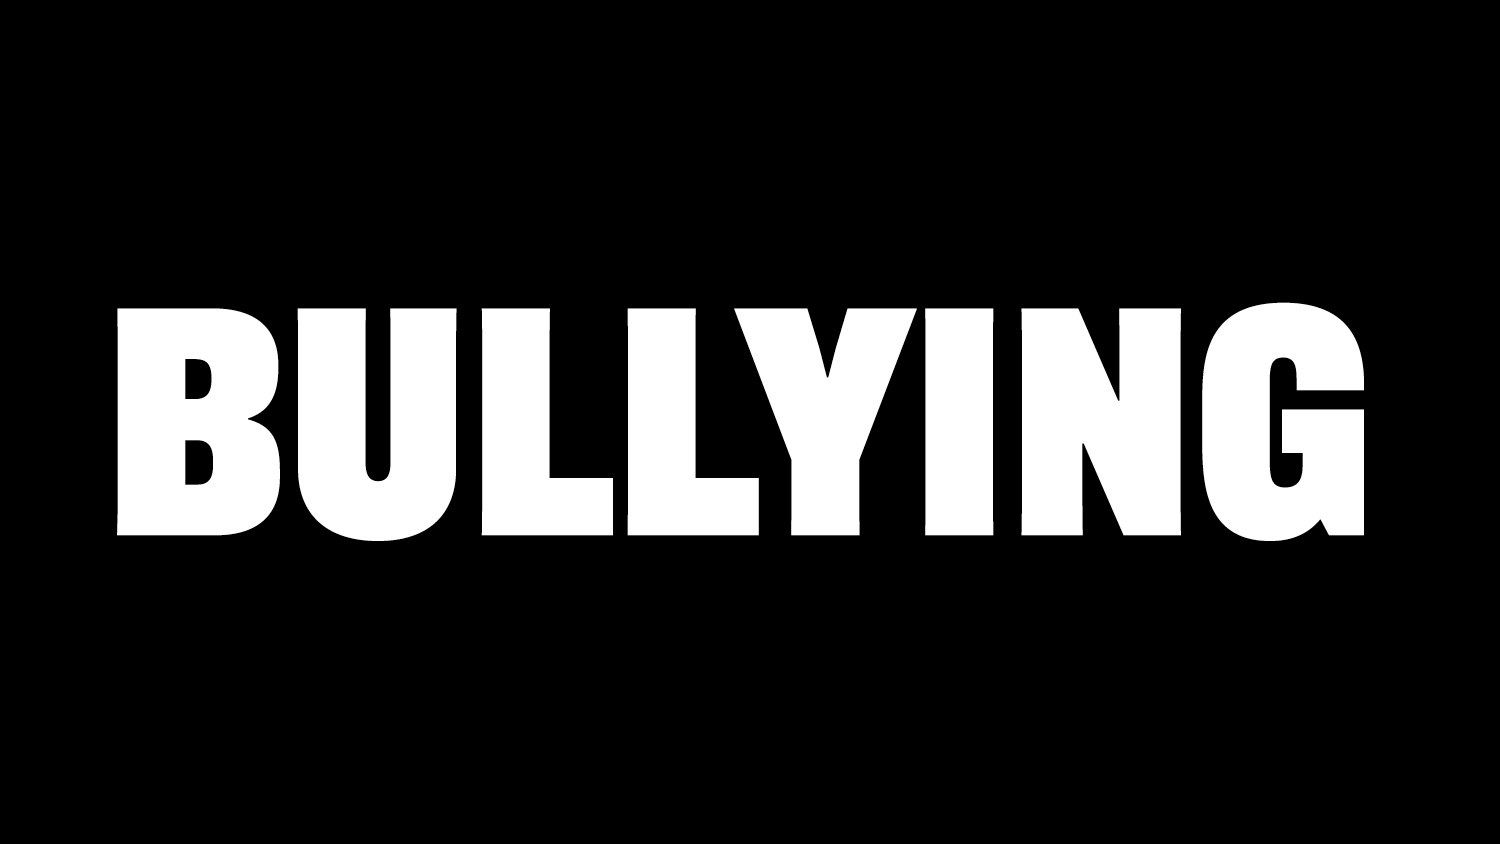 The word bullying in white writing with black background